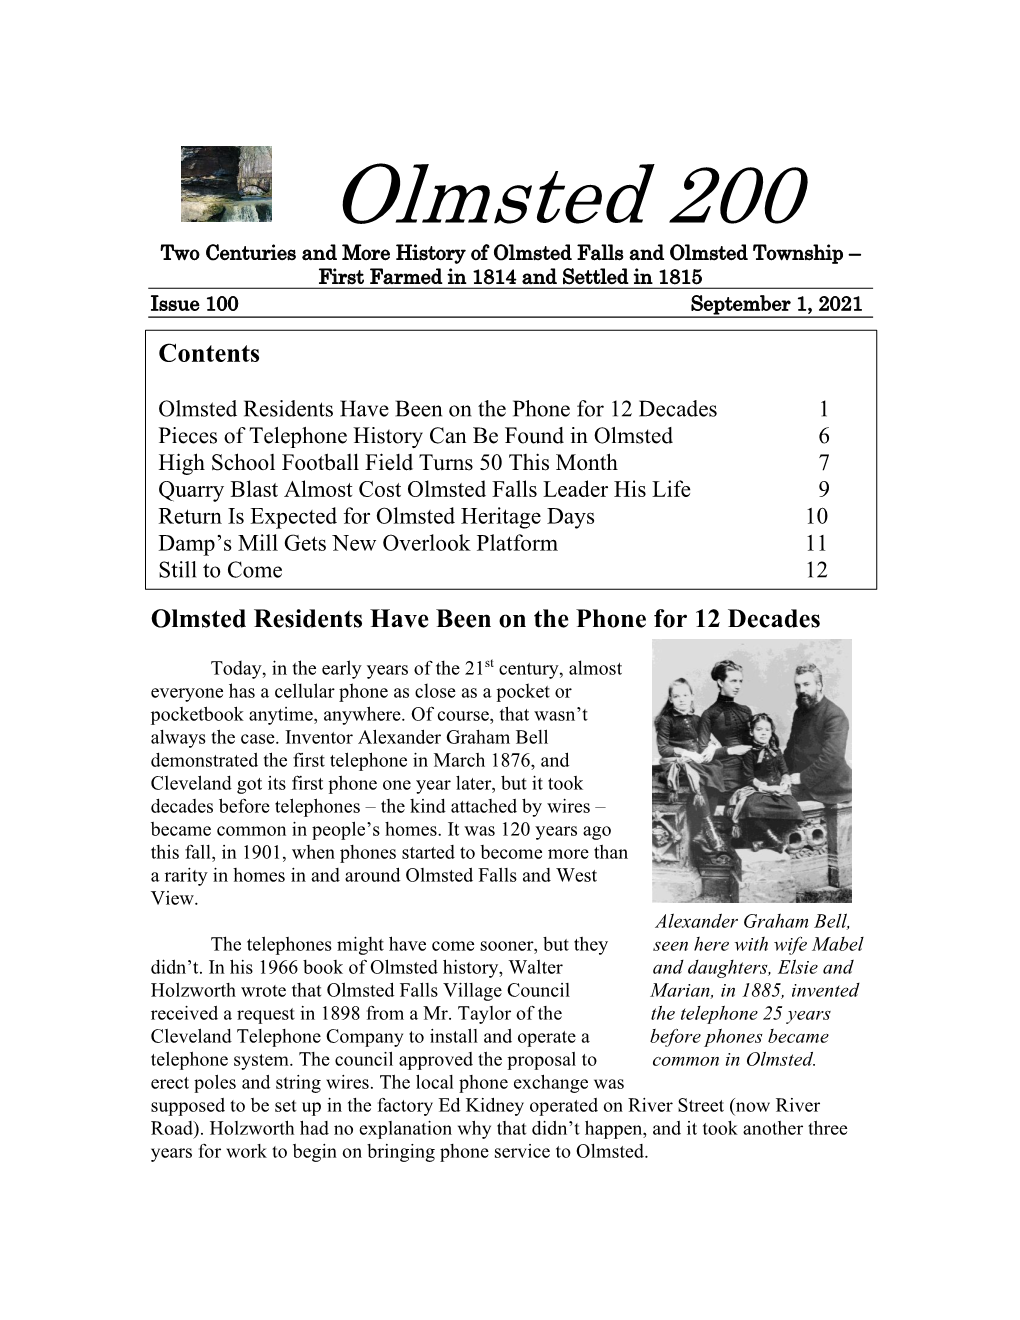 Olmsted 200 Two Centuries and More History of Olmsted Falls and Olmsted Township – First Farmed in 1814 and Settled in 1815 Issue 100 September 1, 2021